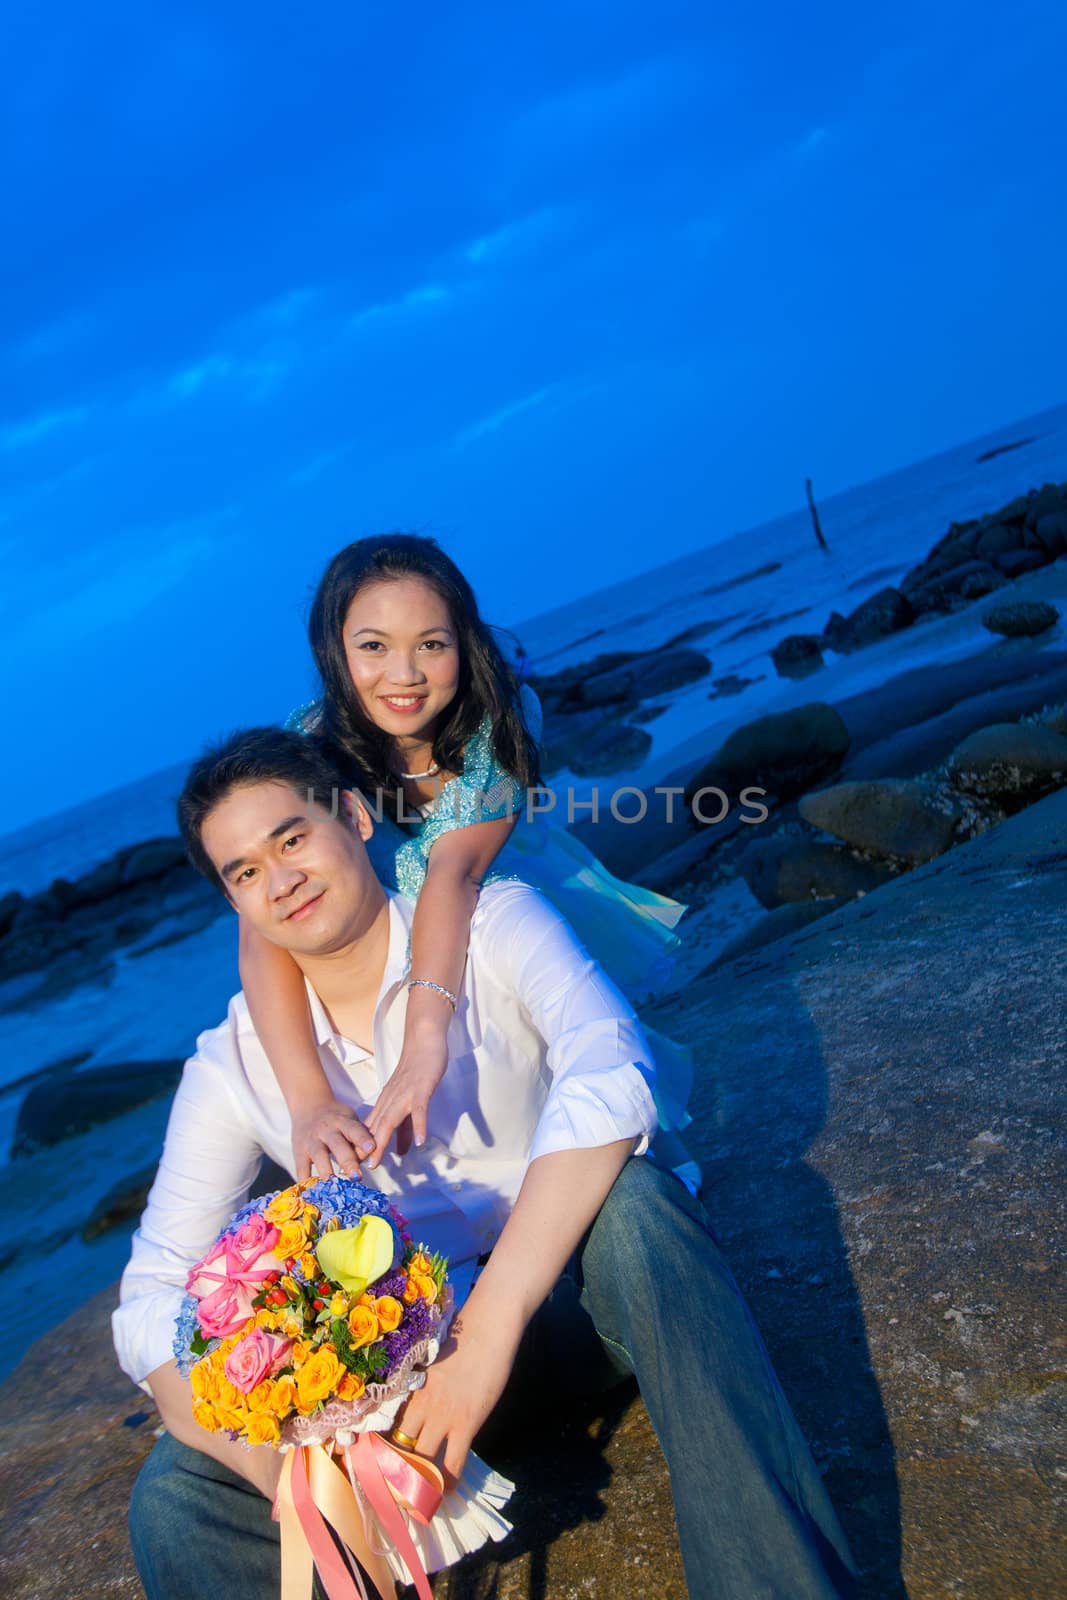 attractive young girl embracing her handsome boyfriend on the beach at dusk